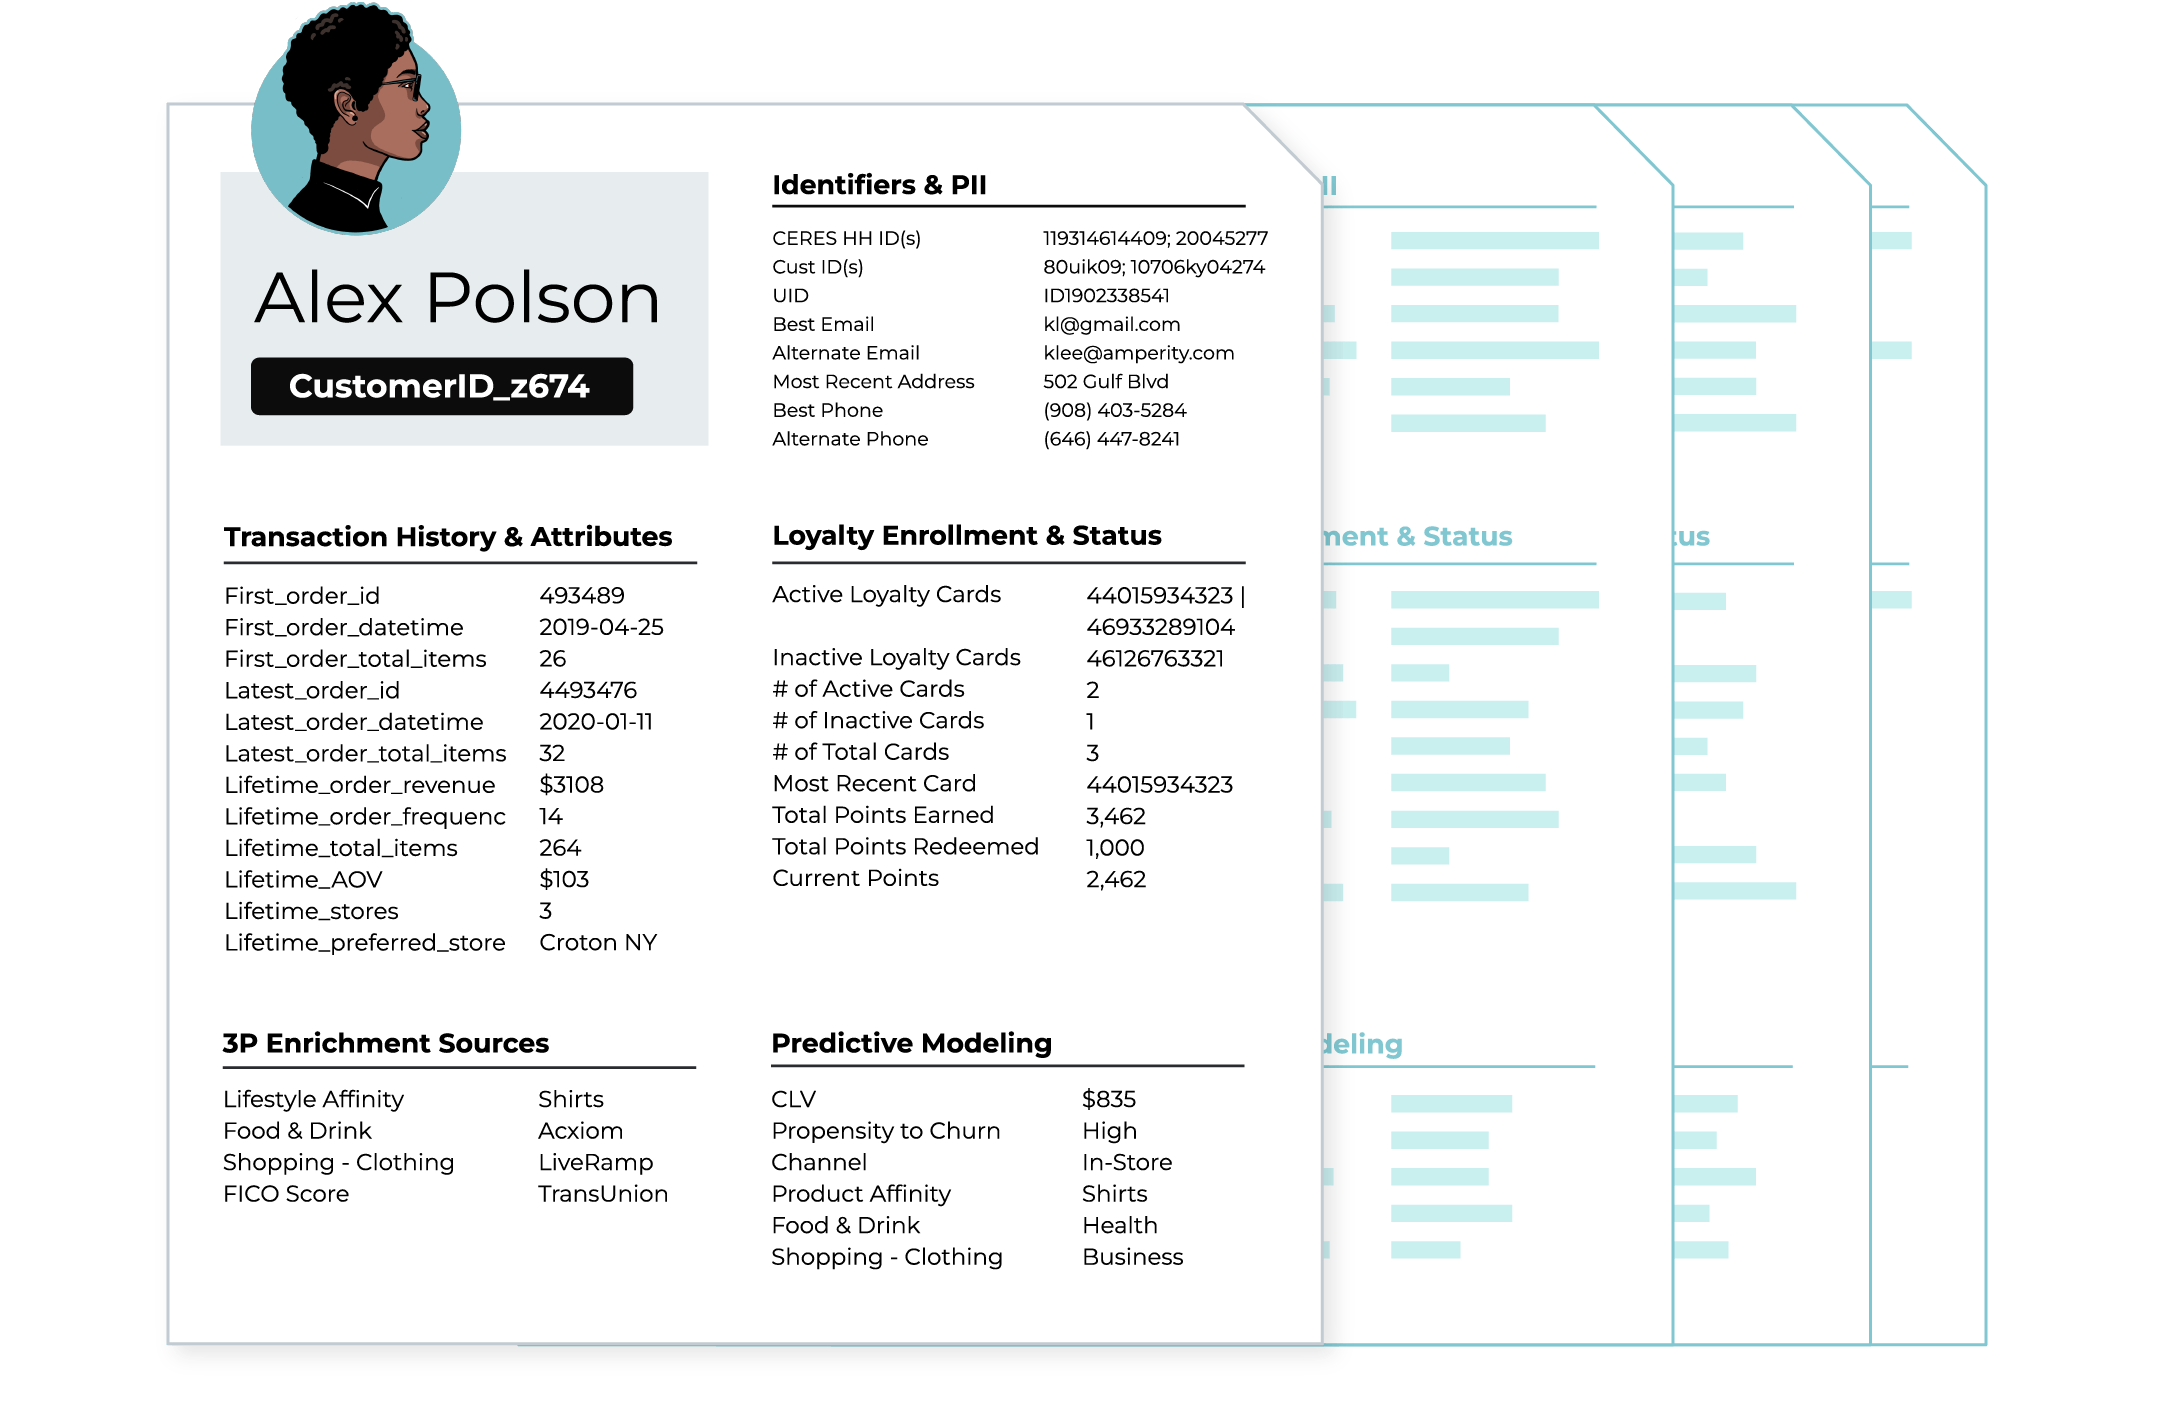 A customer profile "Alex Polson" with an associated CustomerID and data, including transaction history and attributes, identifiers, and PII, Loyalty Enrollment & Status, and more.